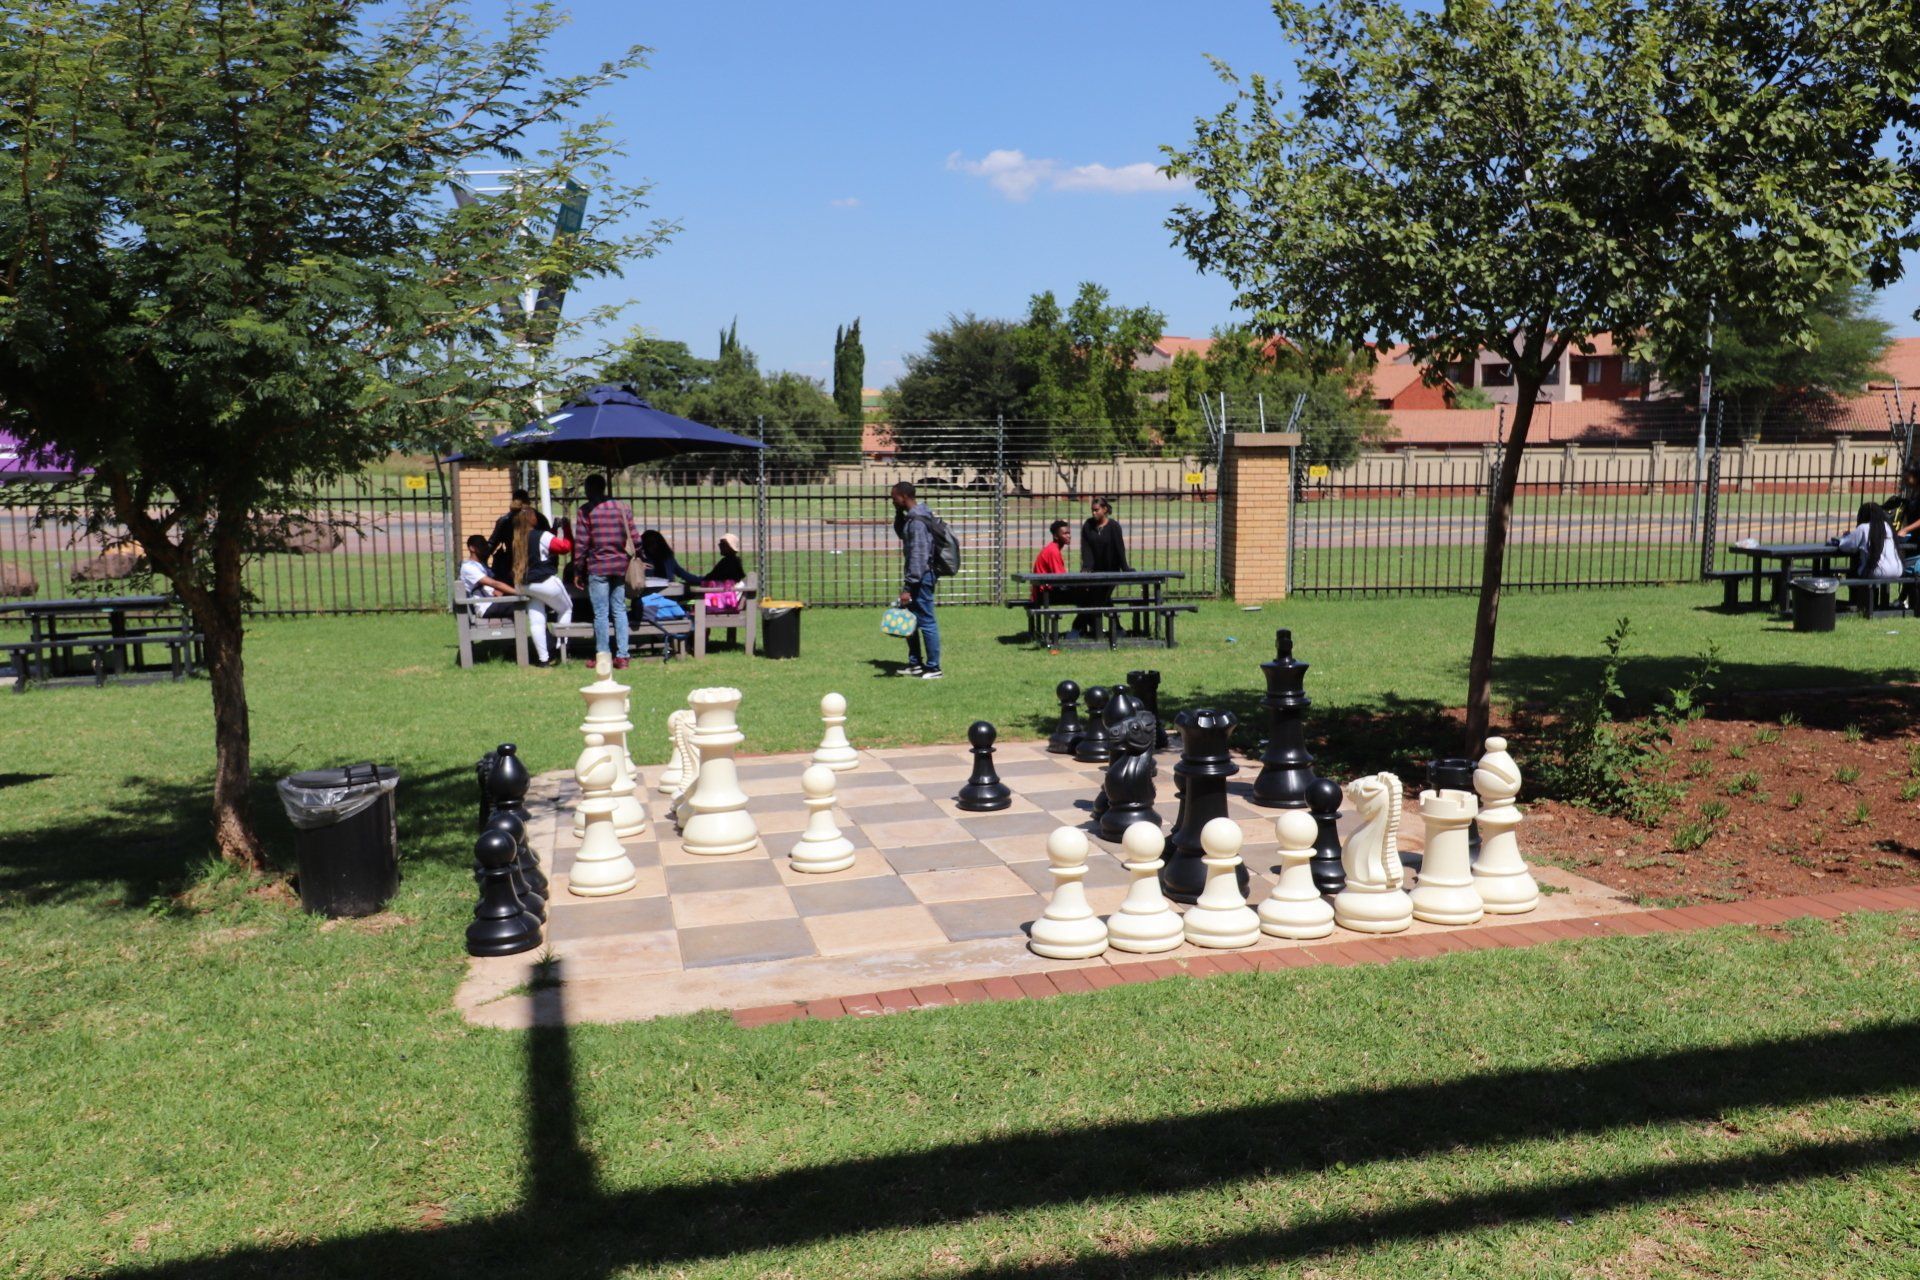 a large chess board in a park with people sitting at picnic tables